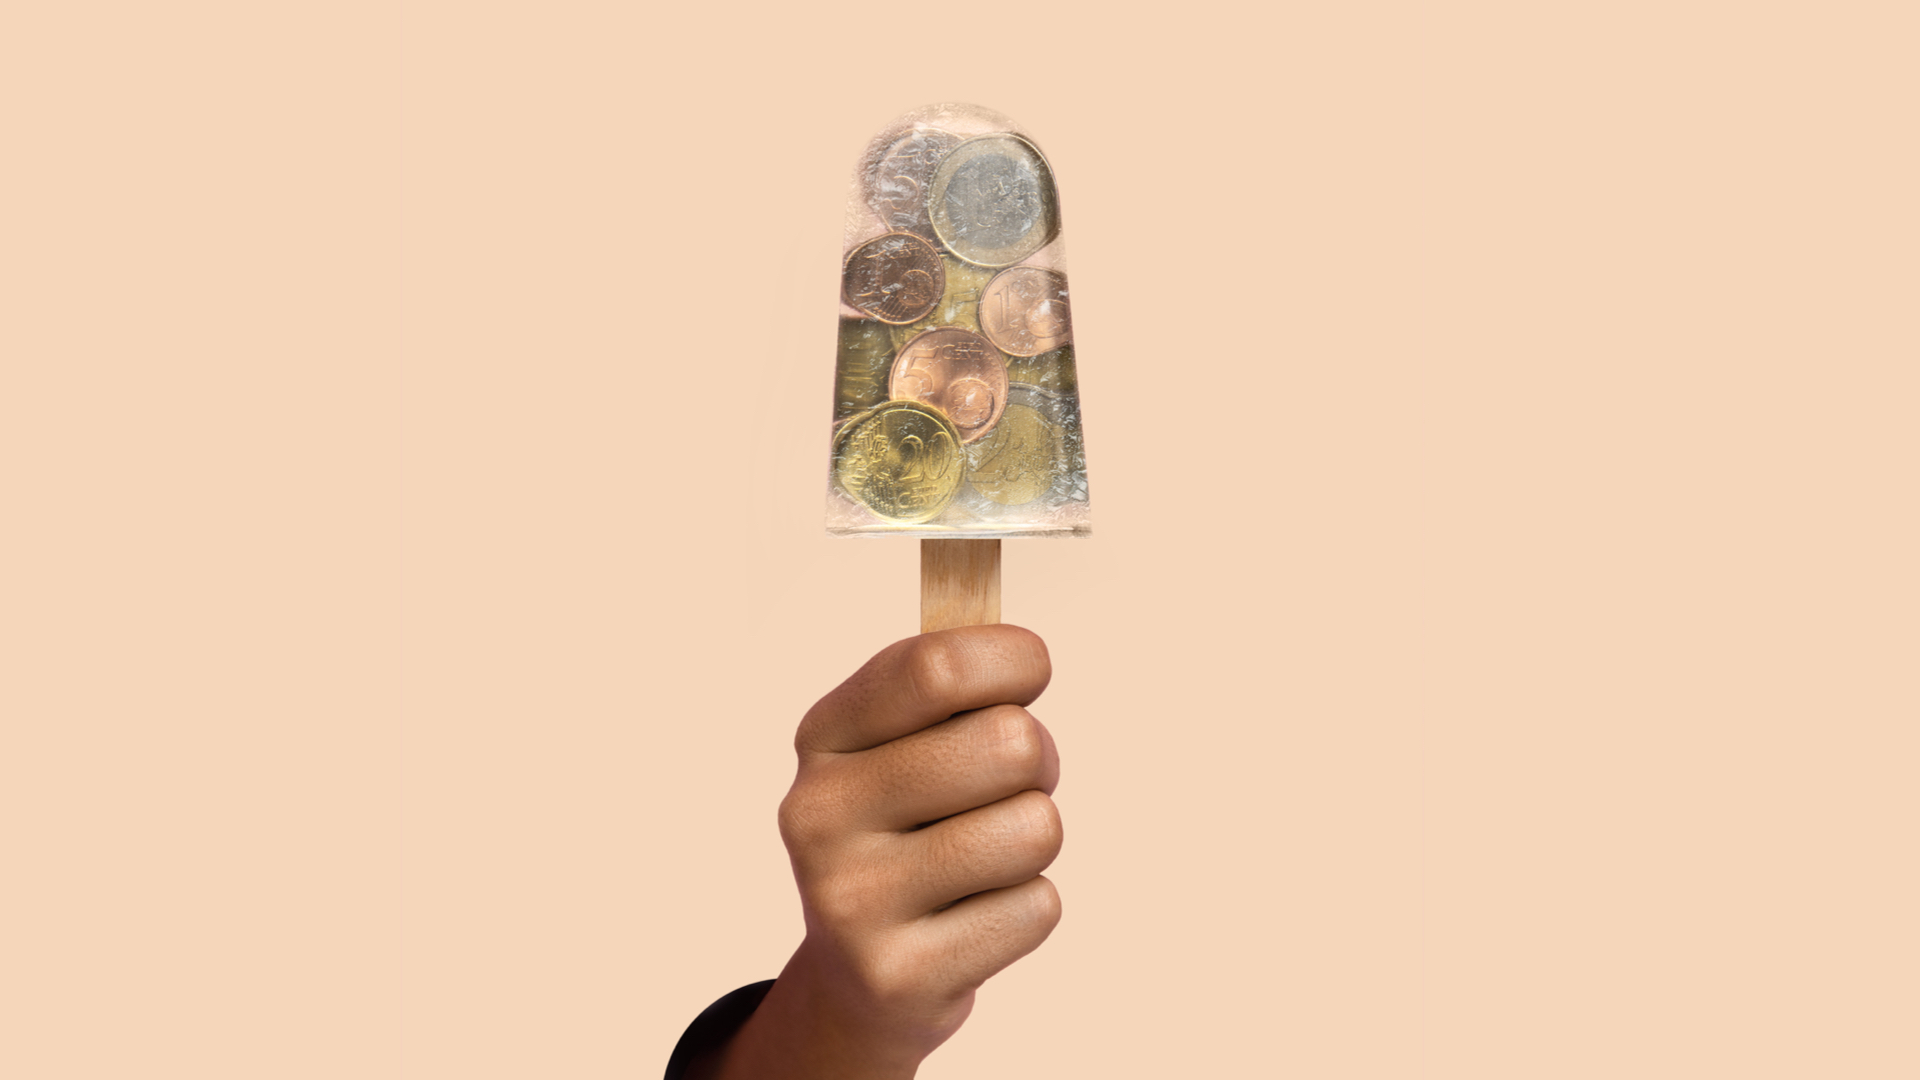 N26 Press Image of our 26 reasons campaign with a hand holding a see-through ice cream with coins in there